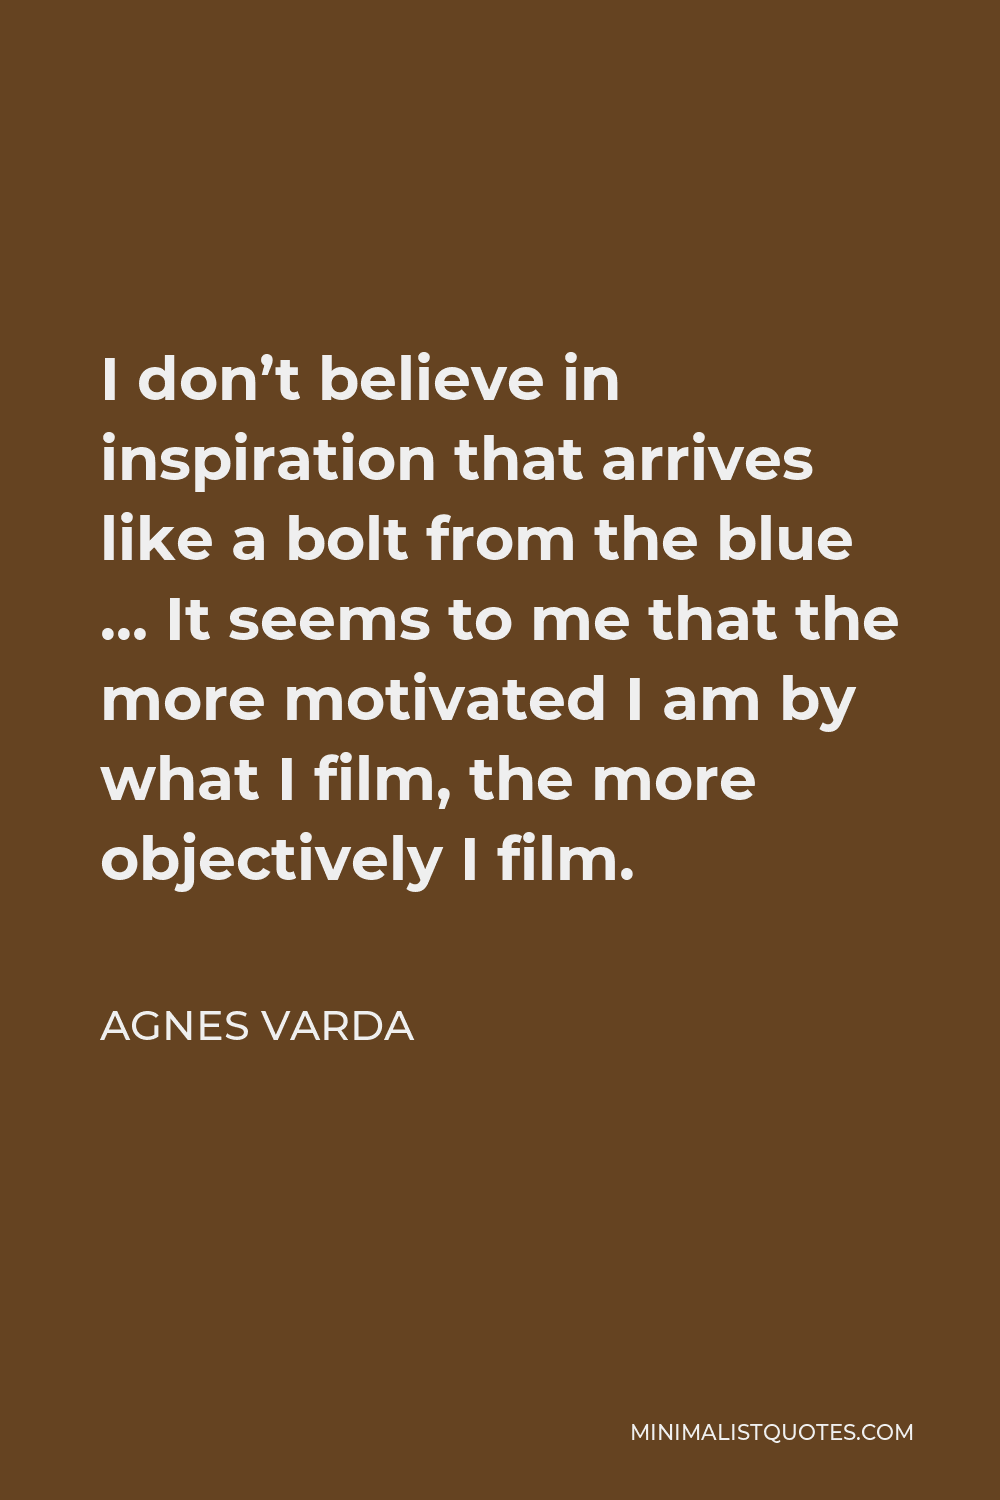 Agnes Varda Quote - I don’t believe in inspiration that arrives like a bolt from the blue … It seems to me that the more motivated I am by what I film, the more objectively I film.